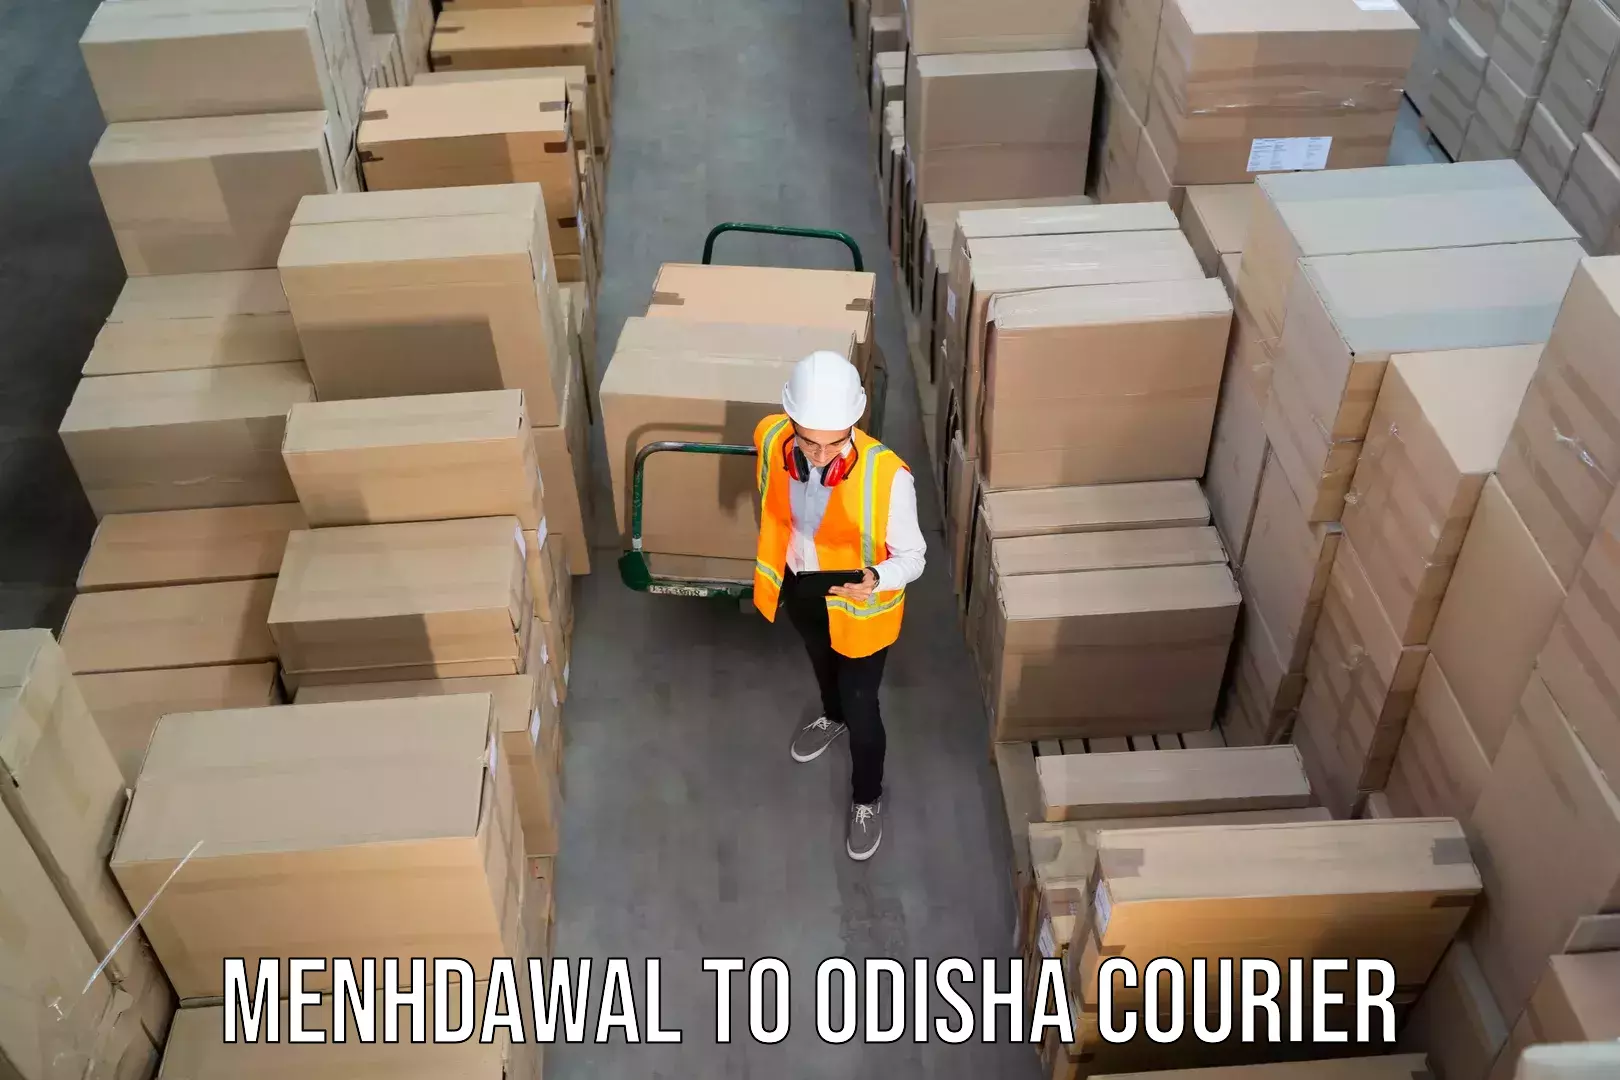 Express delivery capabilities Menhdawal to Mohana